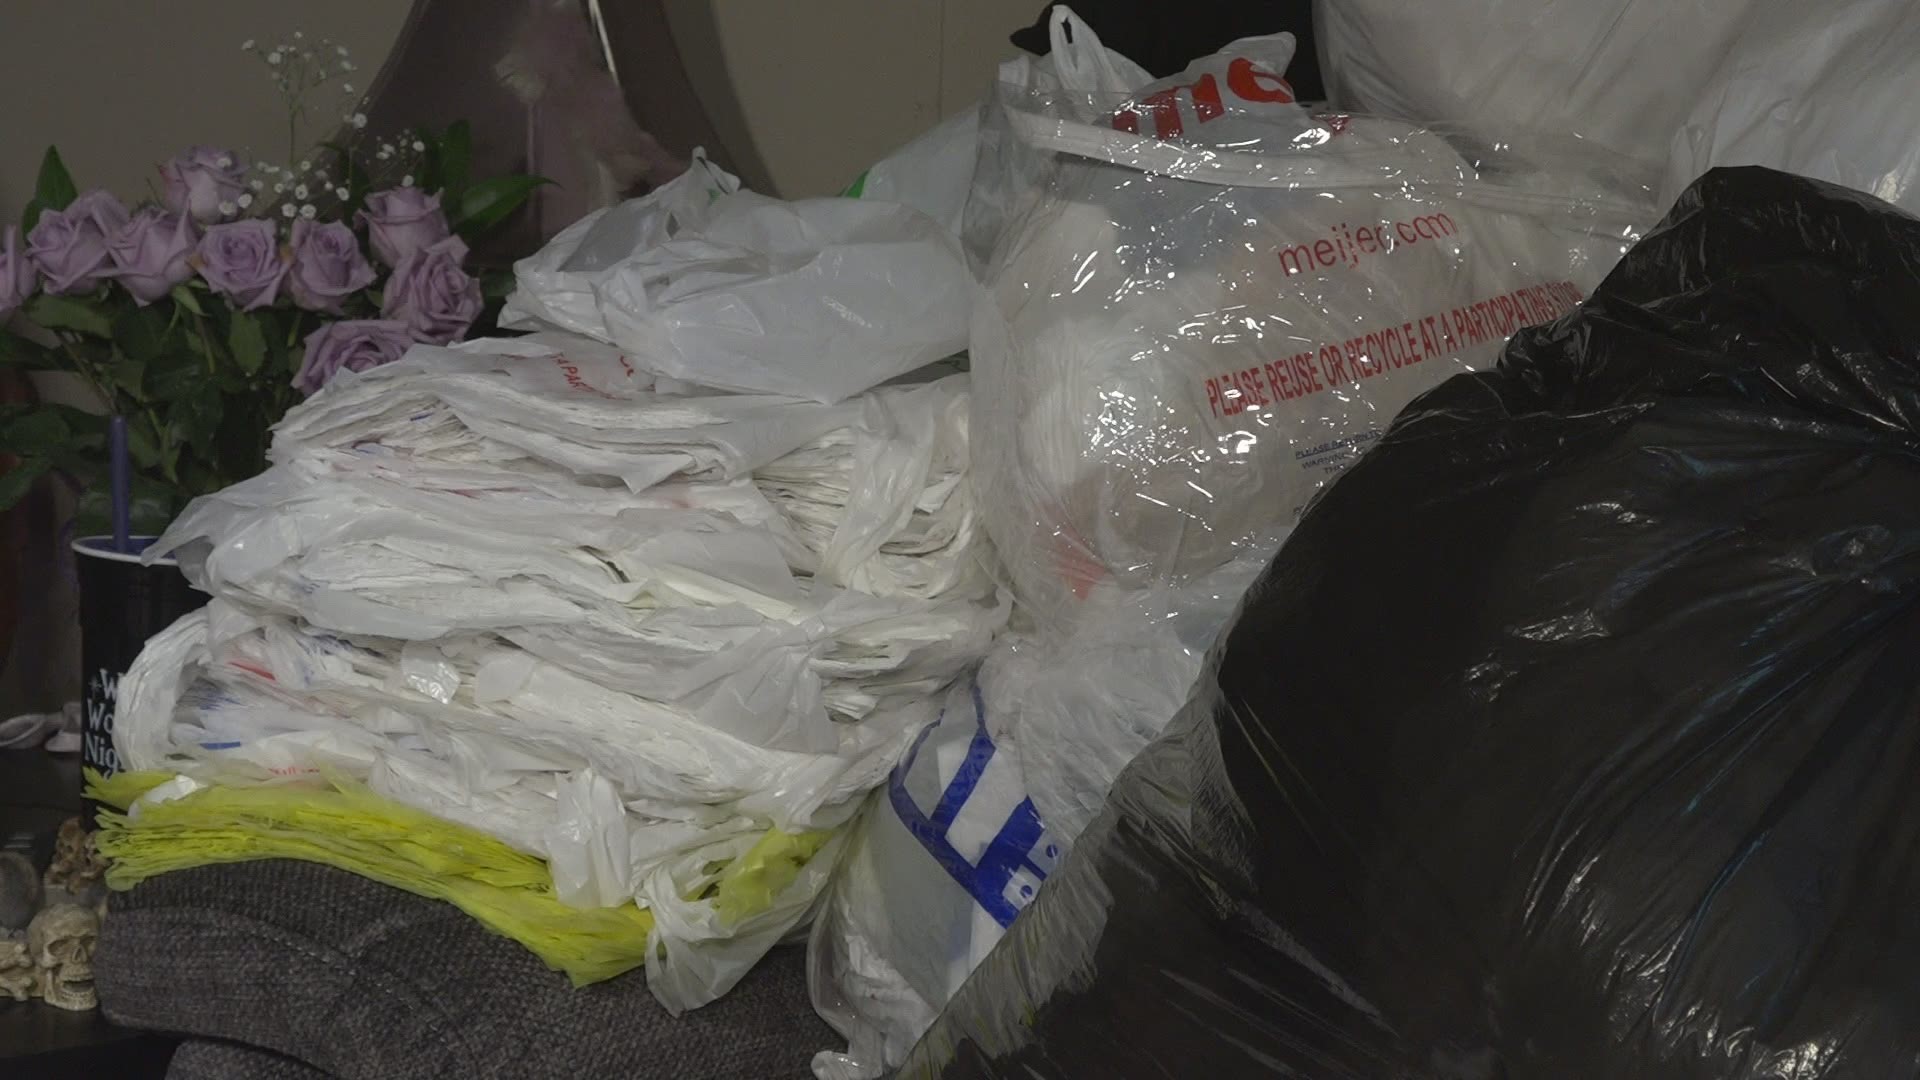 Two Grand Rapids women are on a mission to reduce the number of plastic bags that end up in landfills, and to help people without a home at the same time.